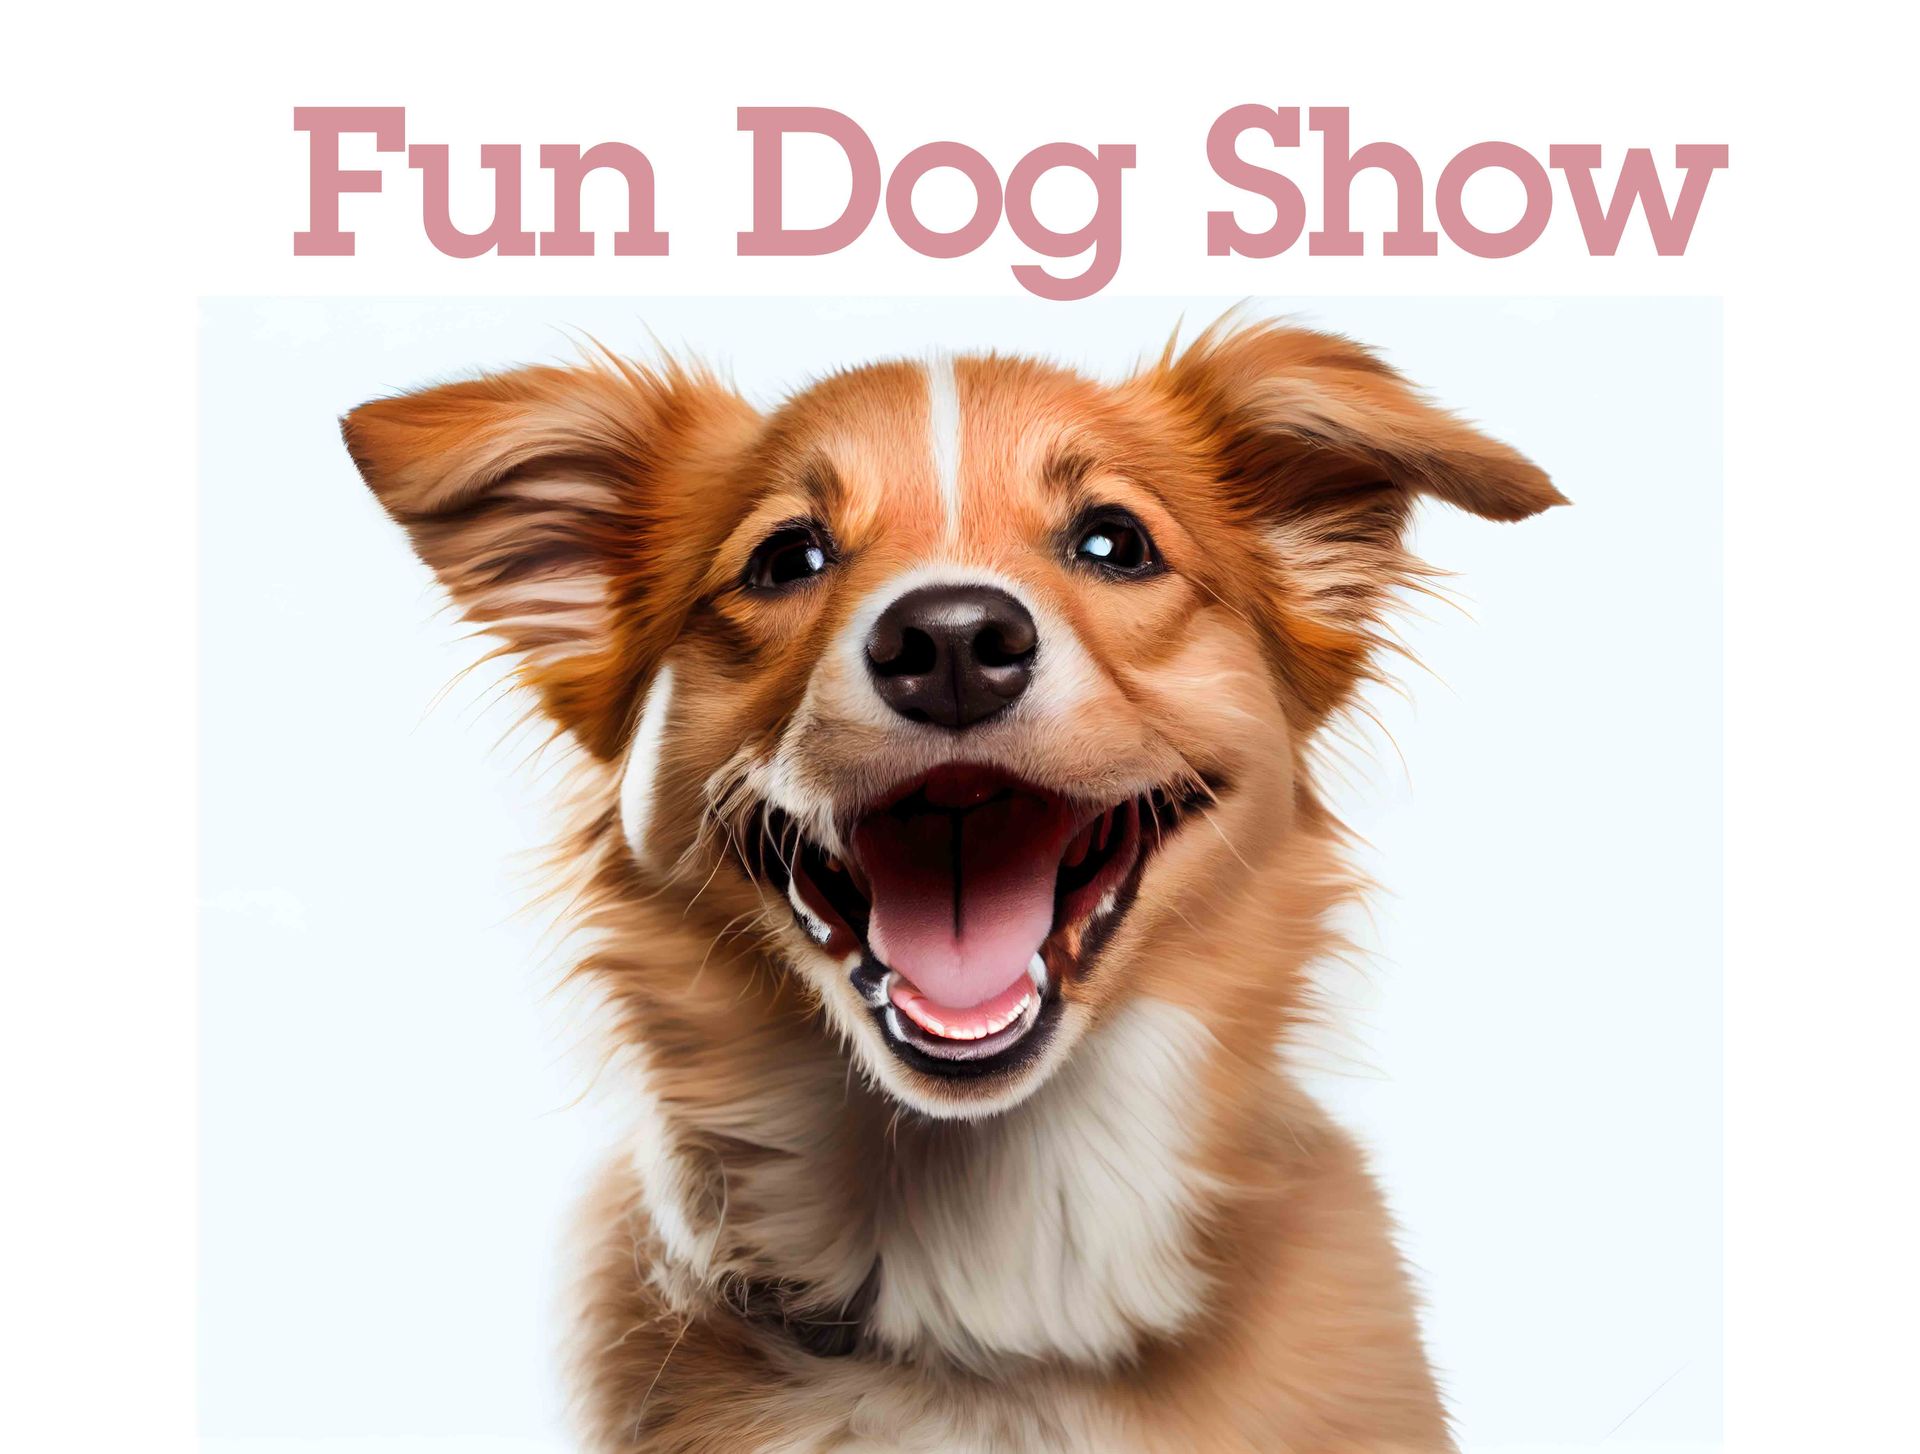 A brown and white dog is smiling with its mouth open at a fun dog show.